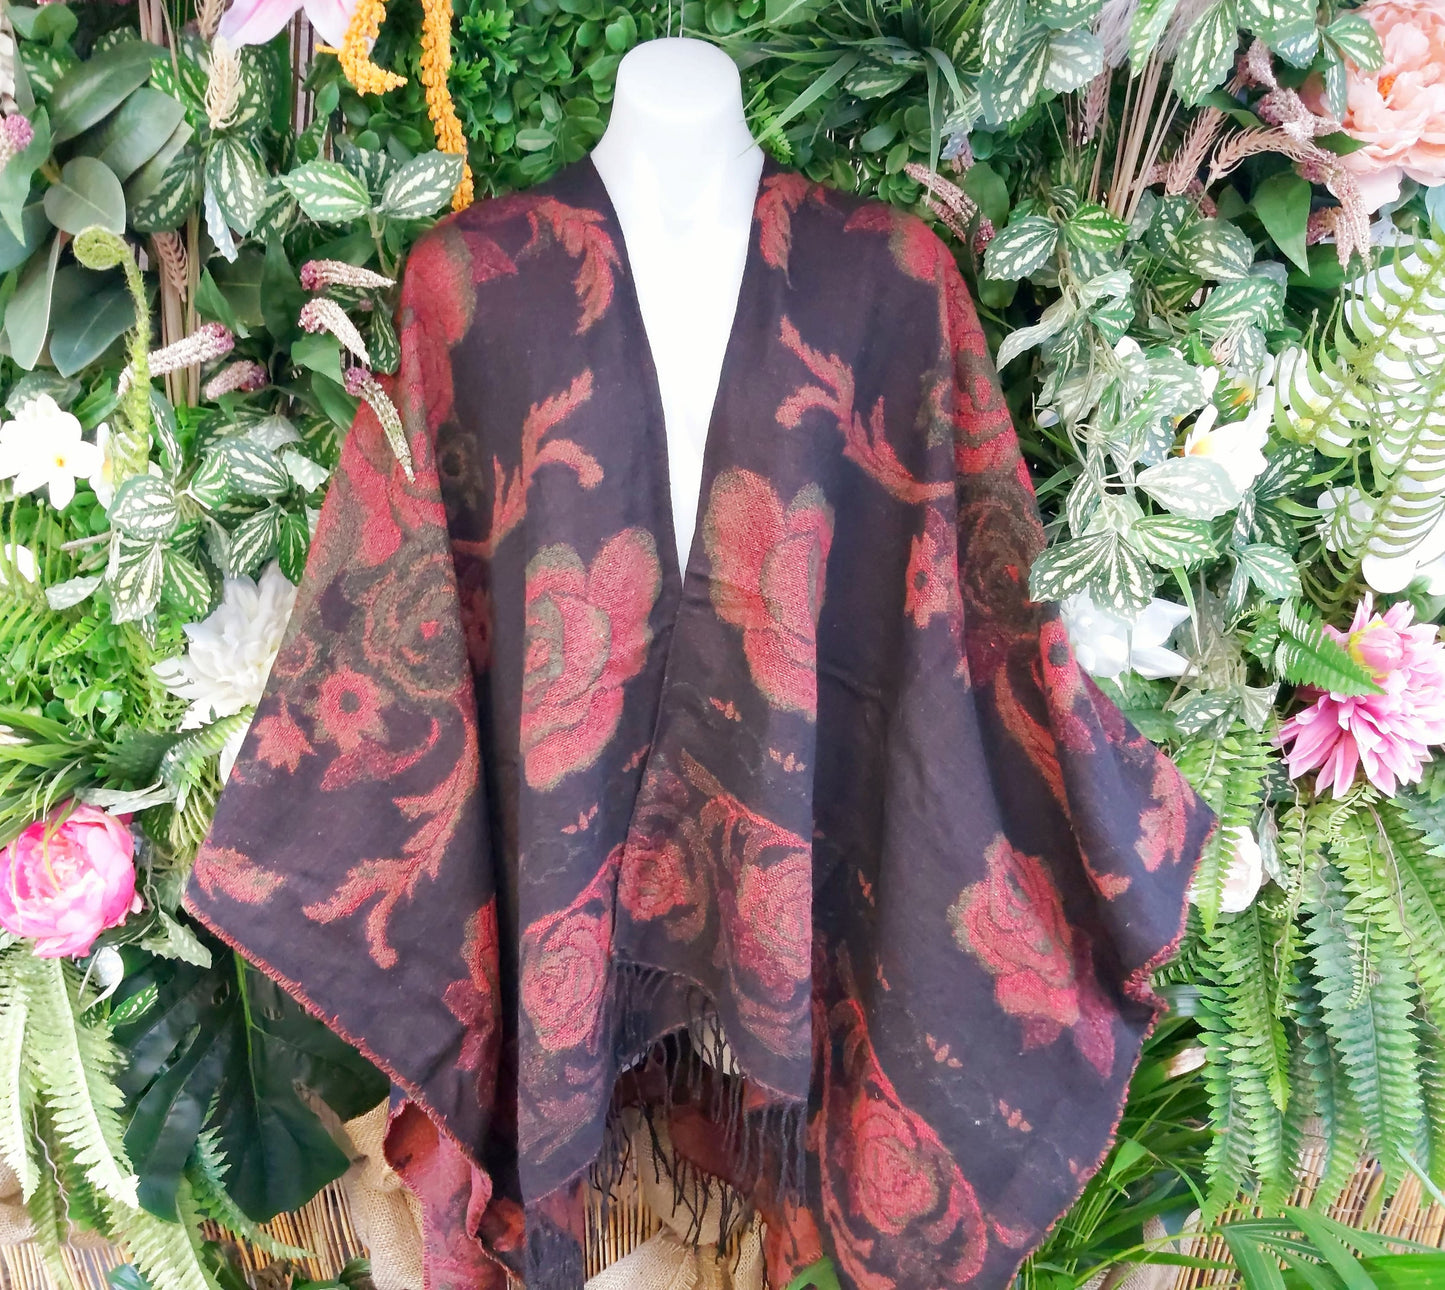 Floral Tassel Wool & Acrylic Cape One Size 16 to 20